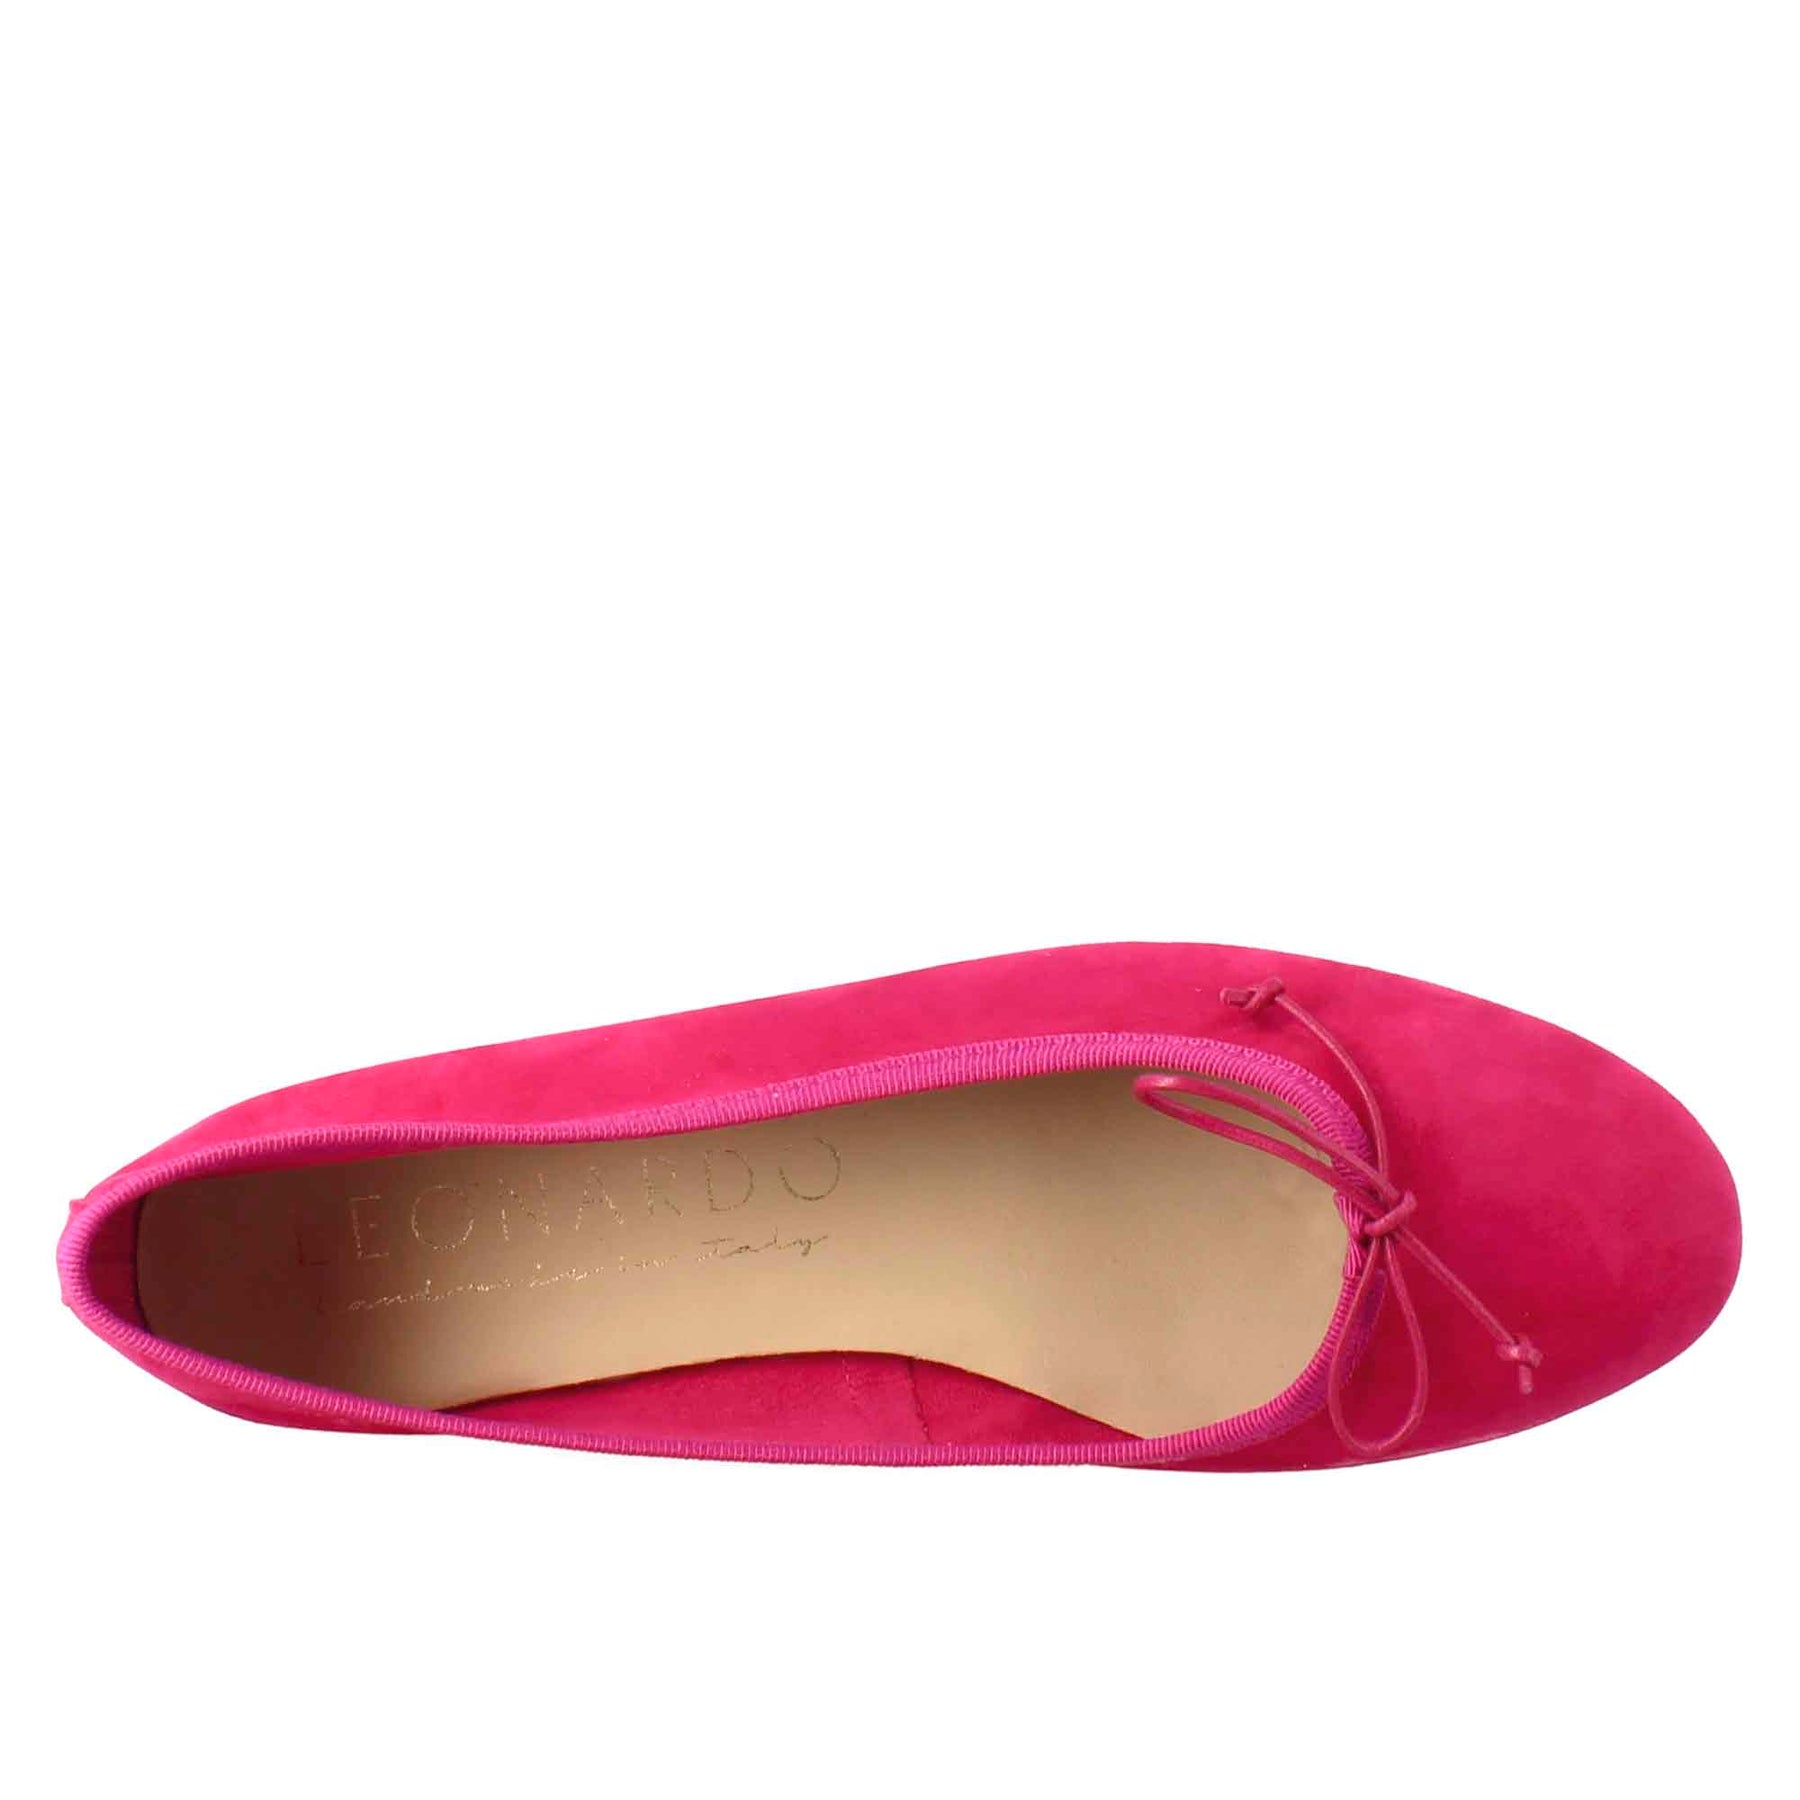 Light women's fuchsia-colored suede ballet flats without lining